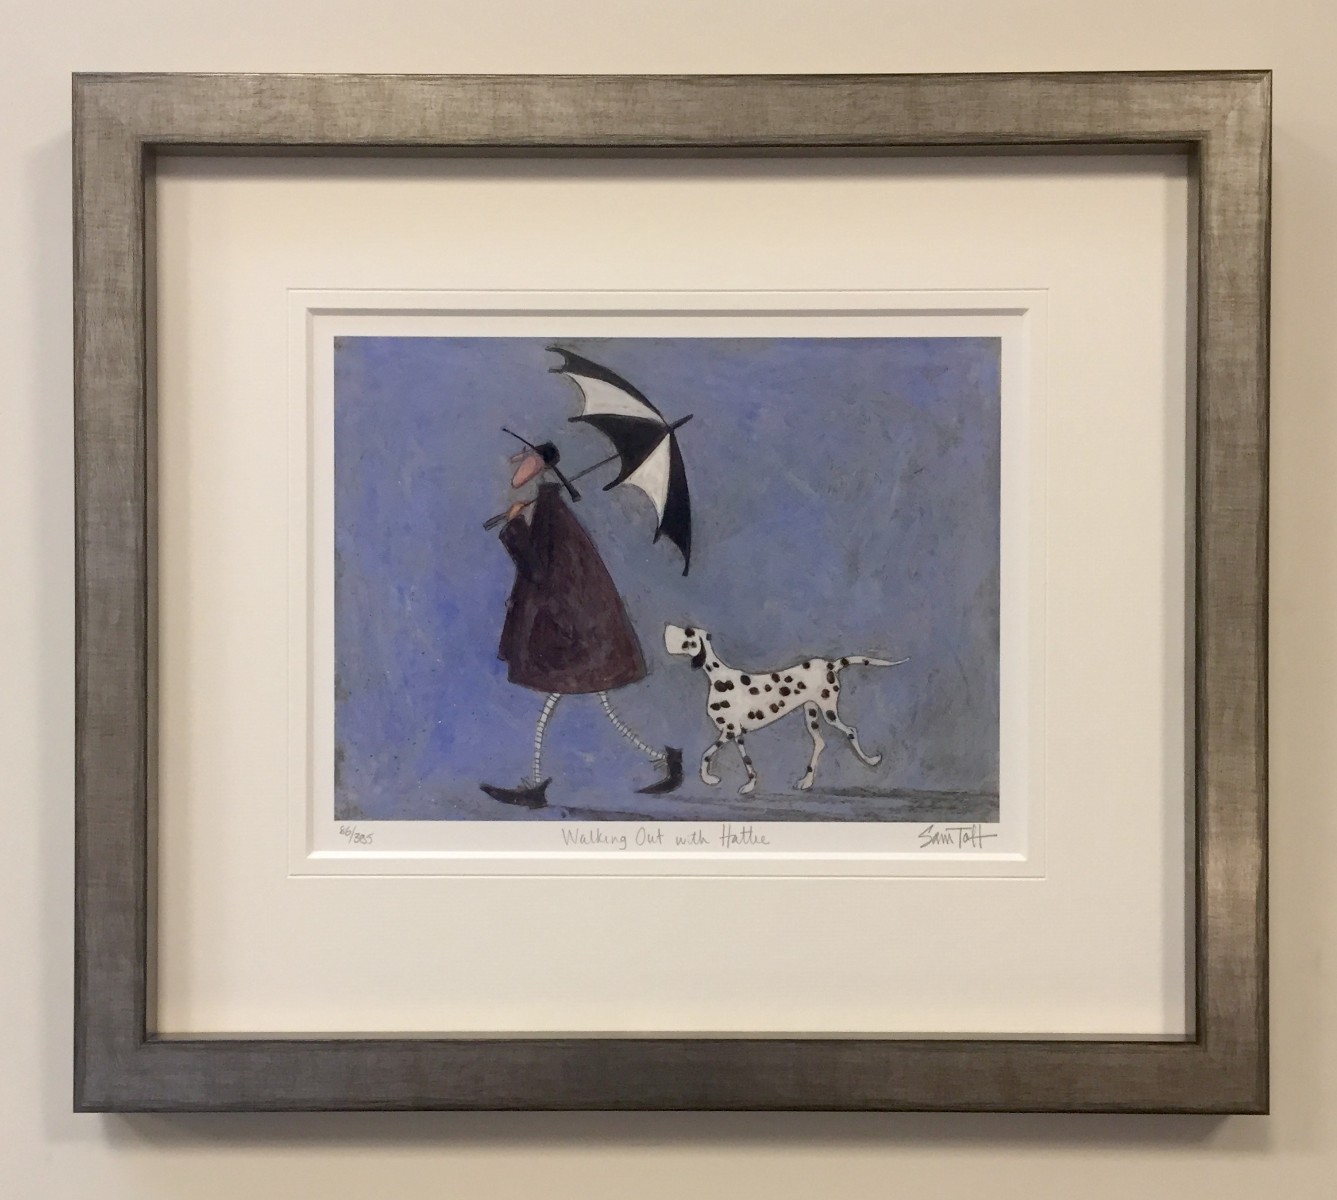 Walking out with Hattie by Sam Toft